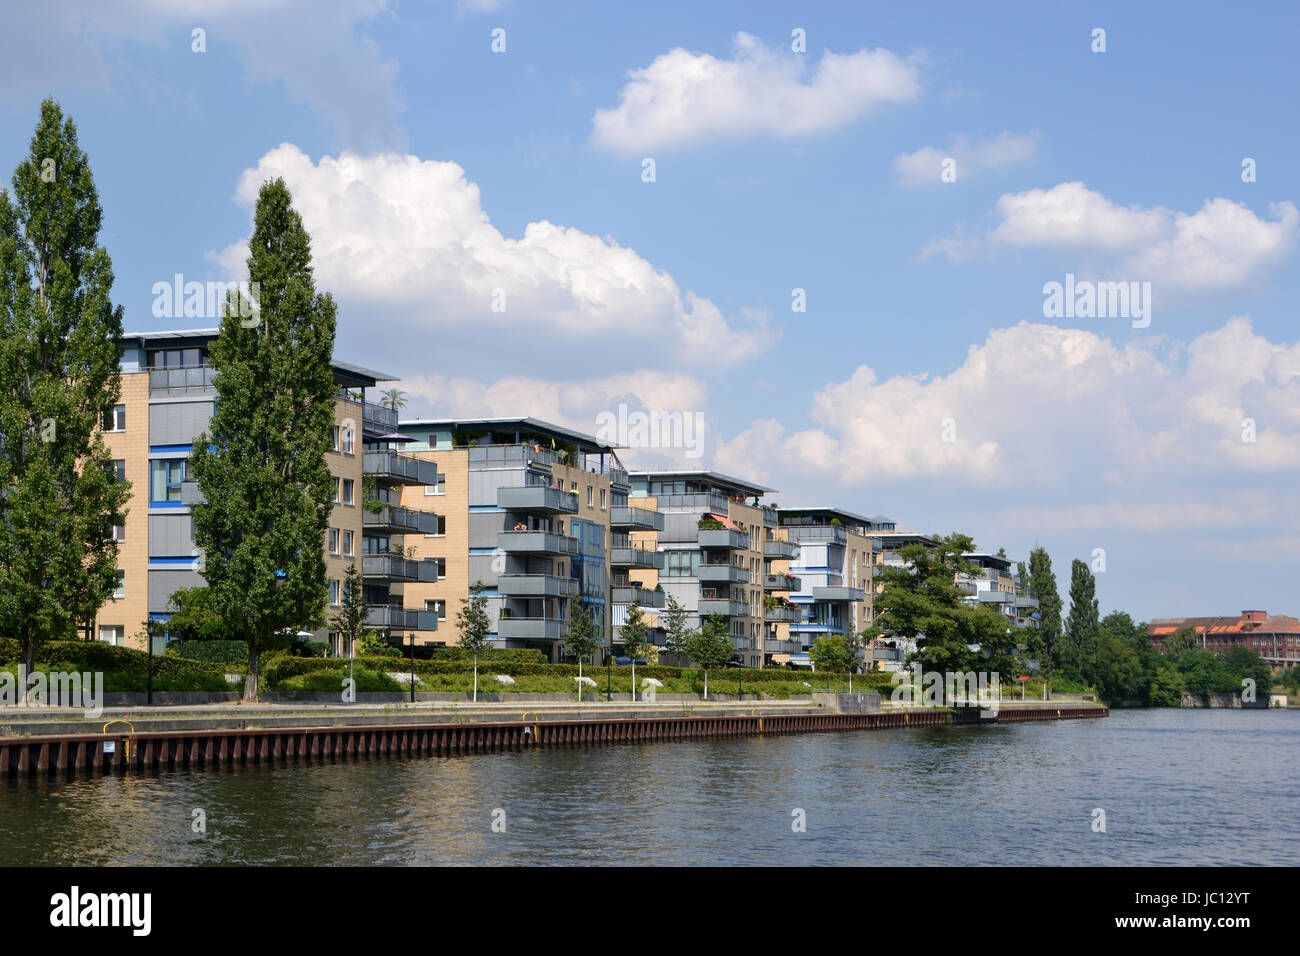 living on the river spree Stock Photo